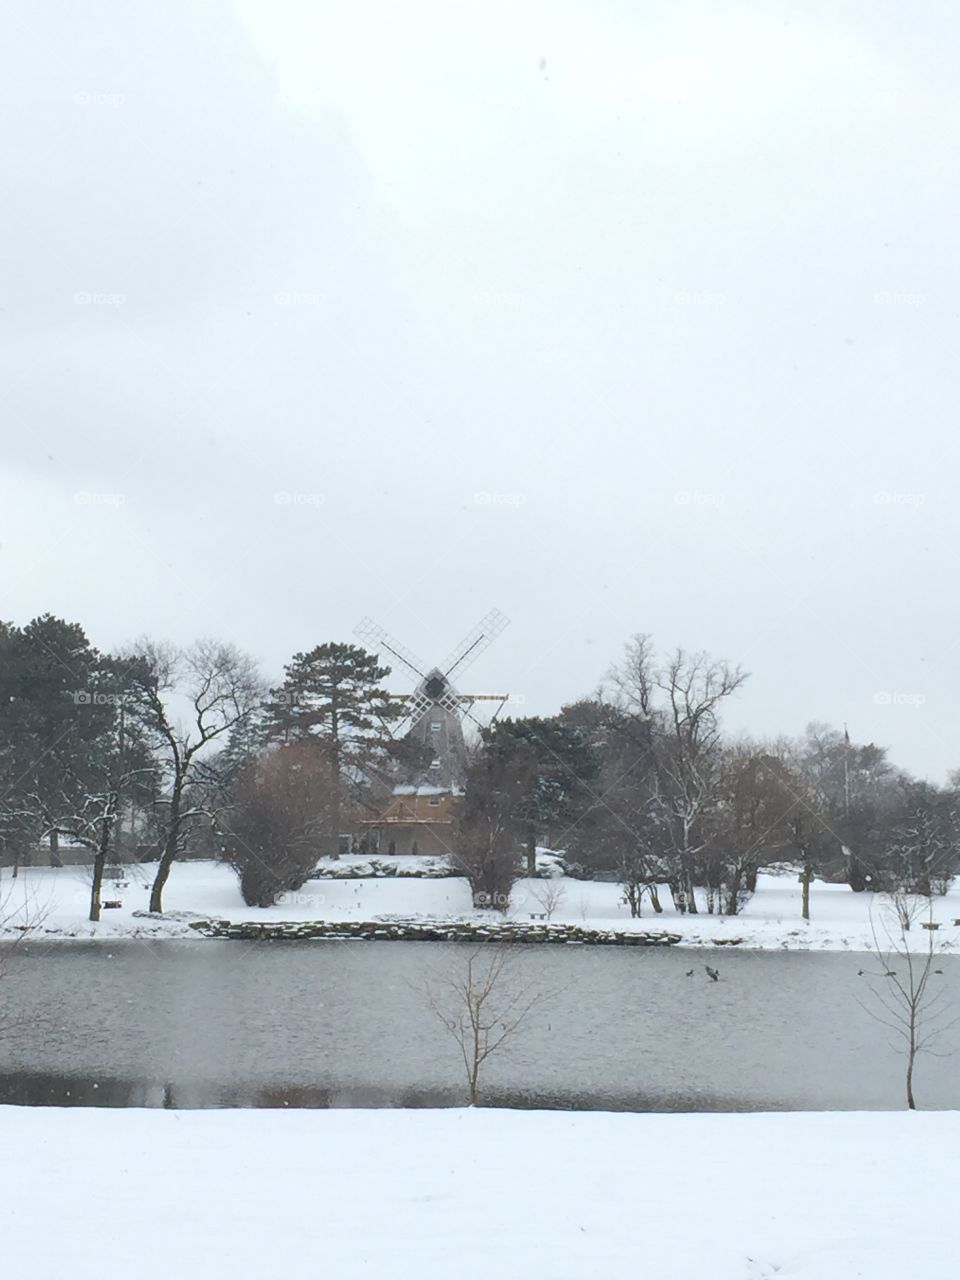 Windmill by the pond on a snowy day